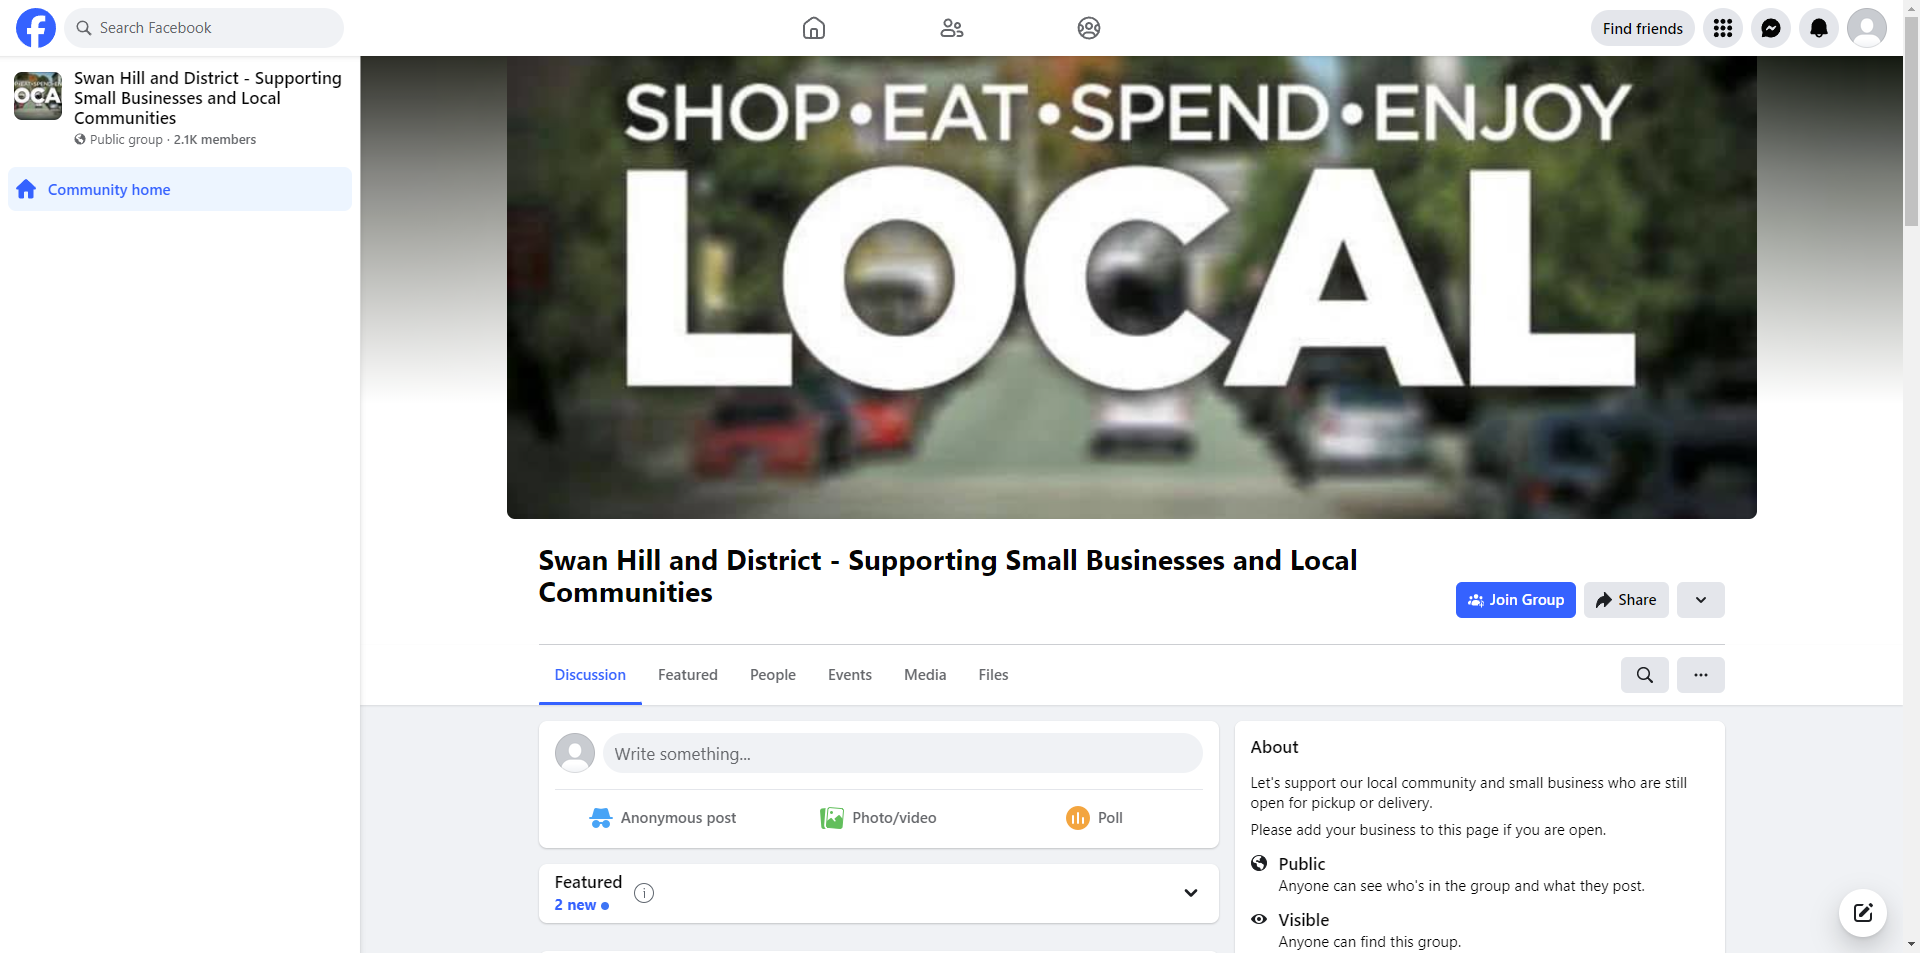 Swan Hill and District - Supporting Small Businesses and Local Communities